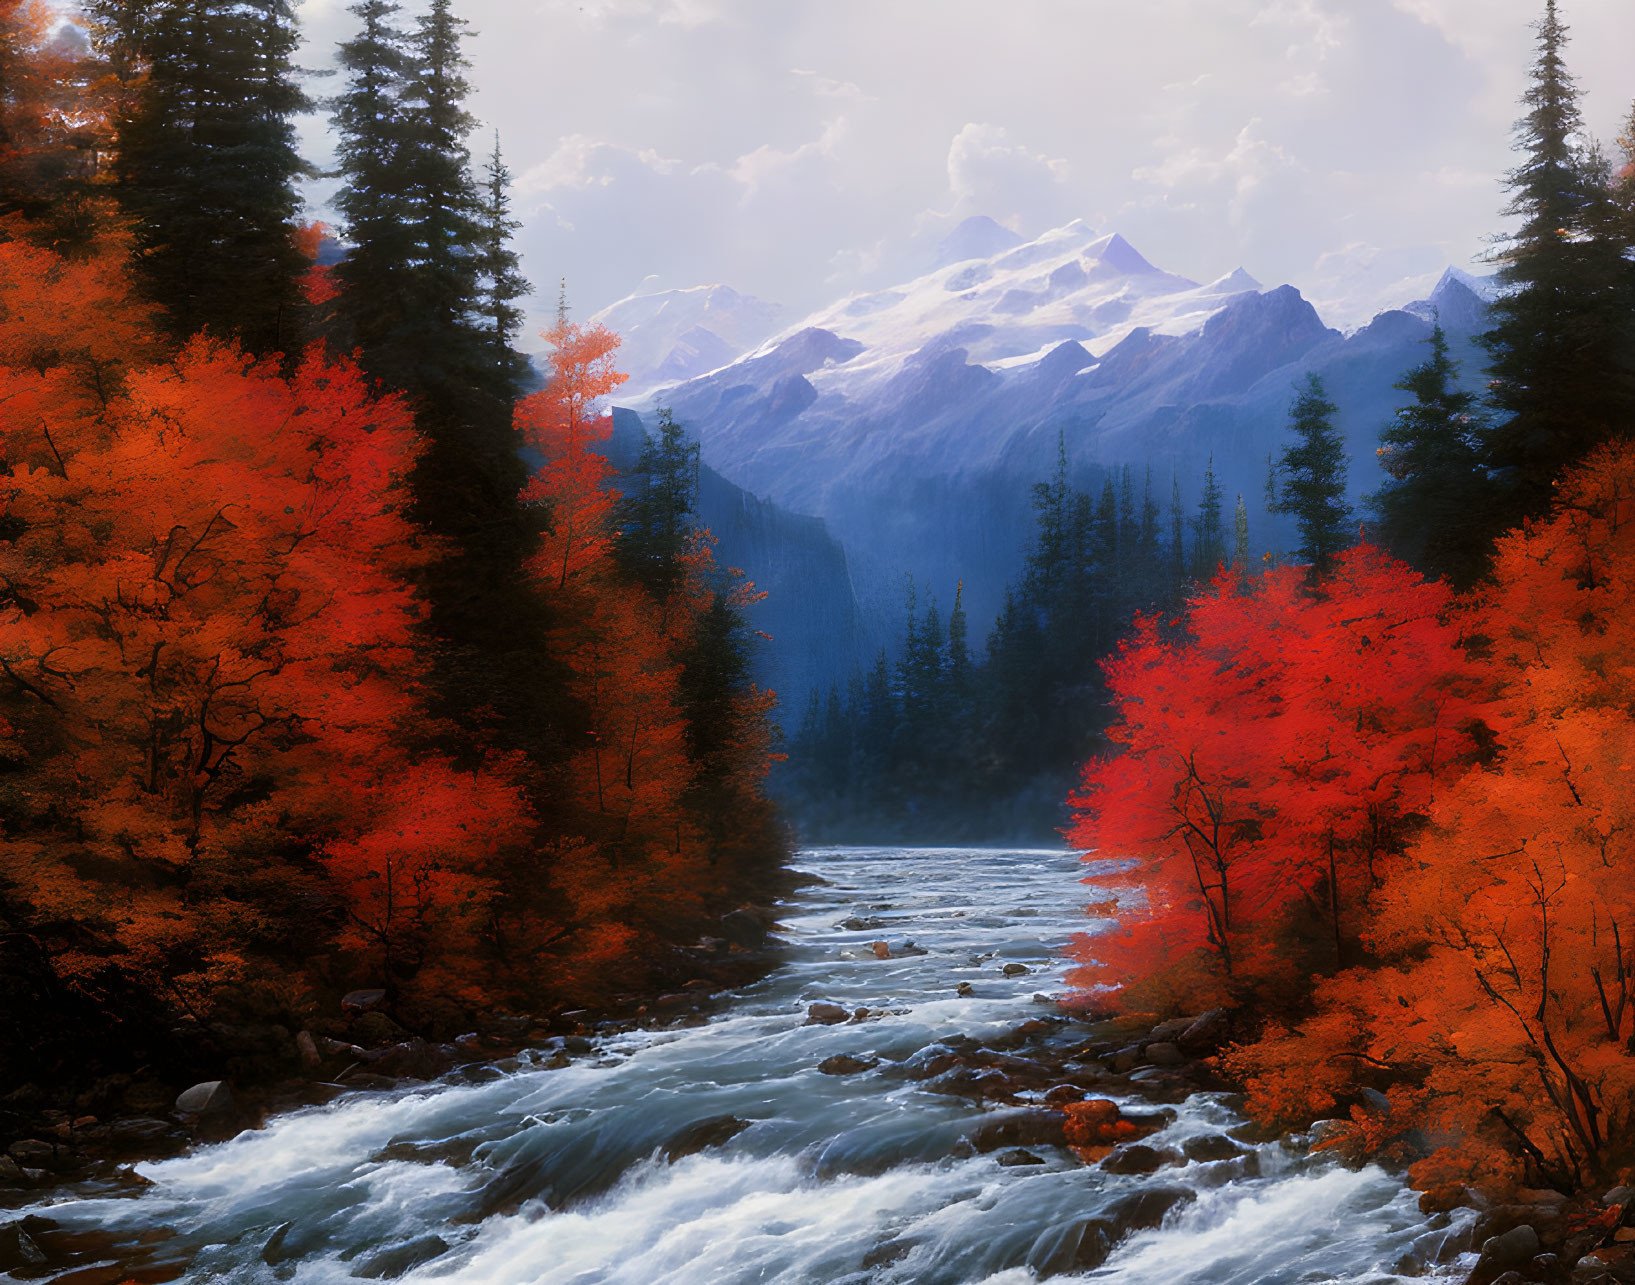 Vibrant autumn landscape with red trees, rocky river, and snowy mountains